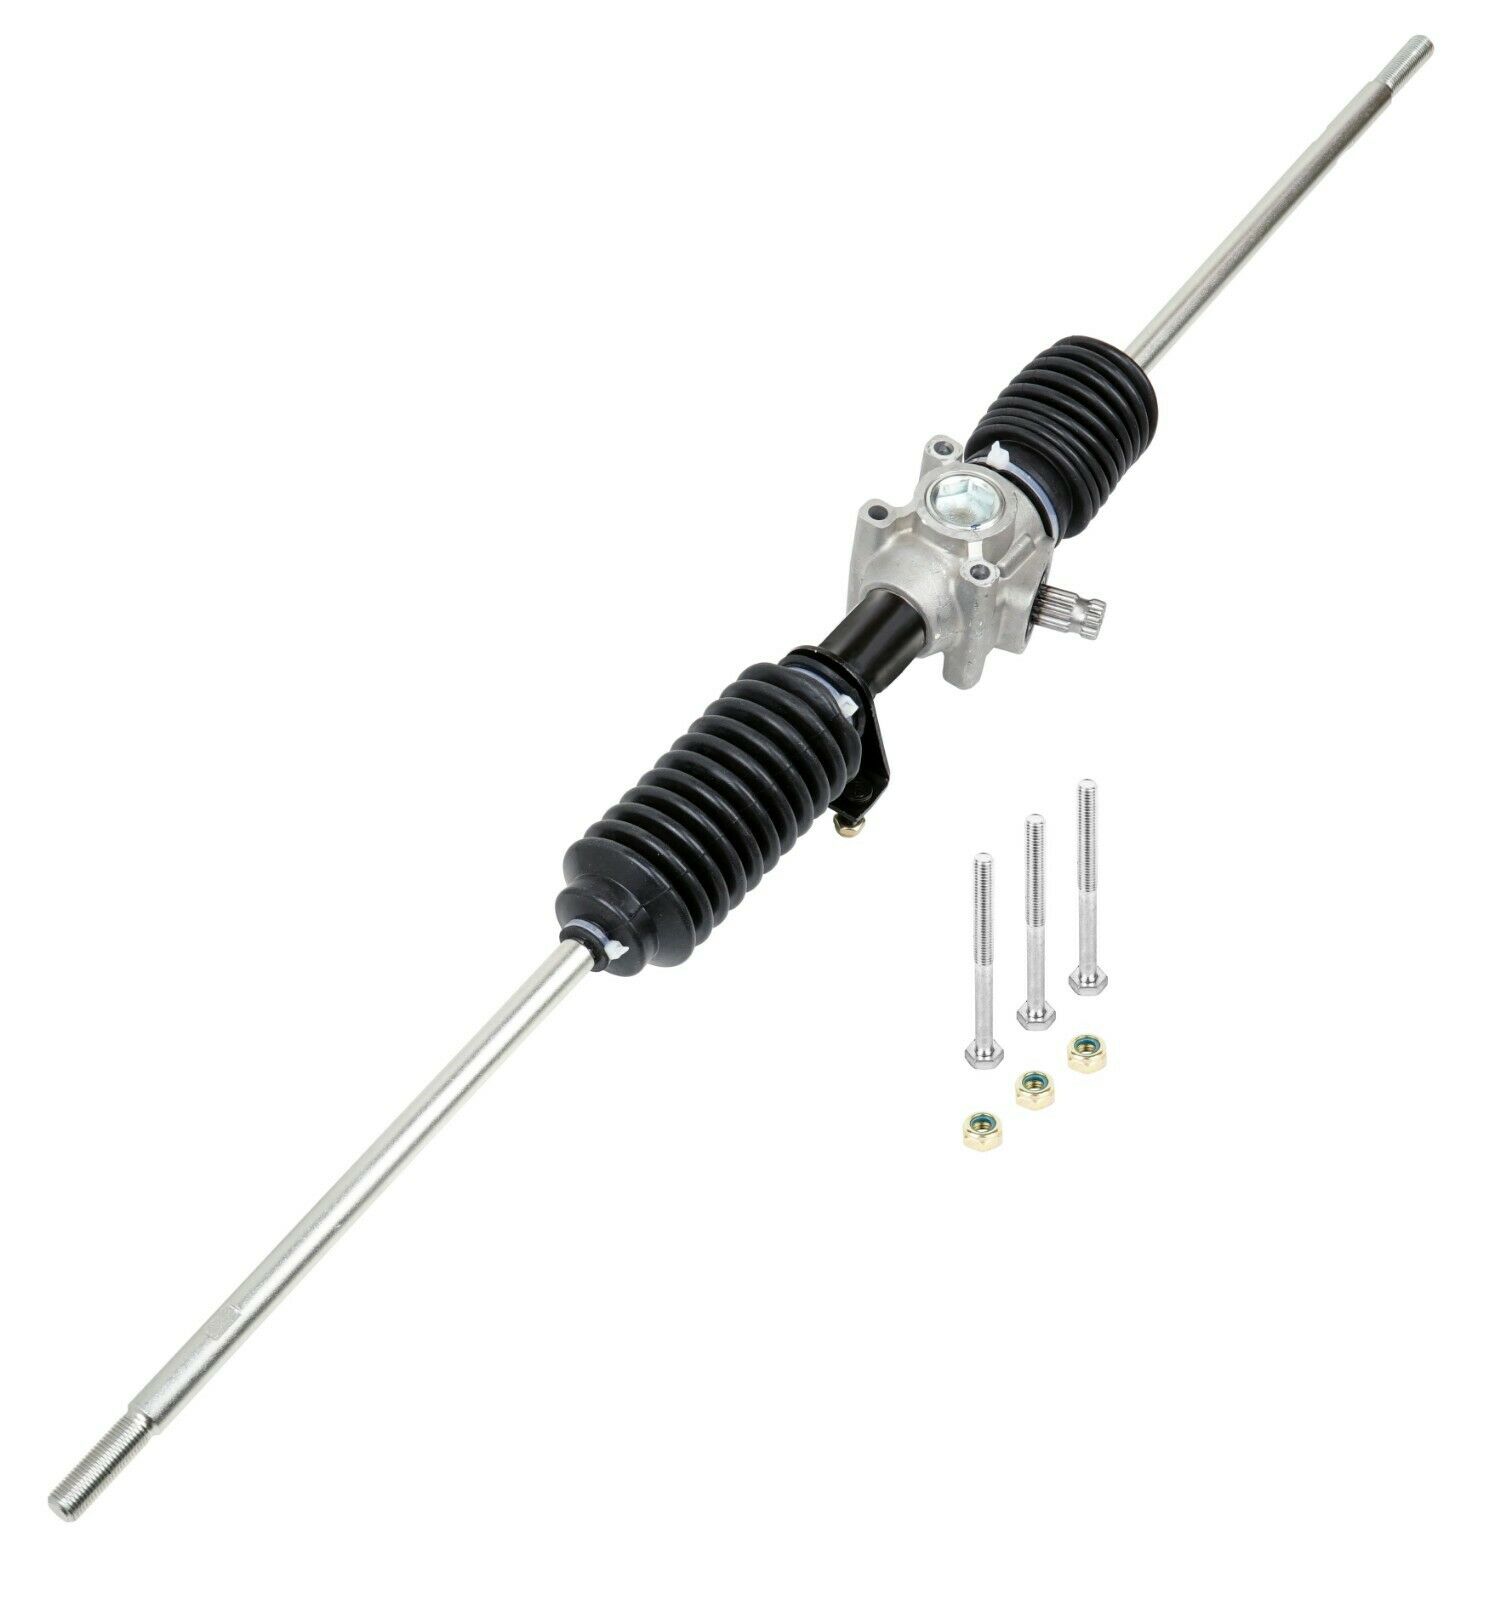 Gear Box Steering Rack and Pinion for Polaris RZR 900 60 Inch 2016-2020/ 1824349